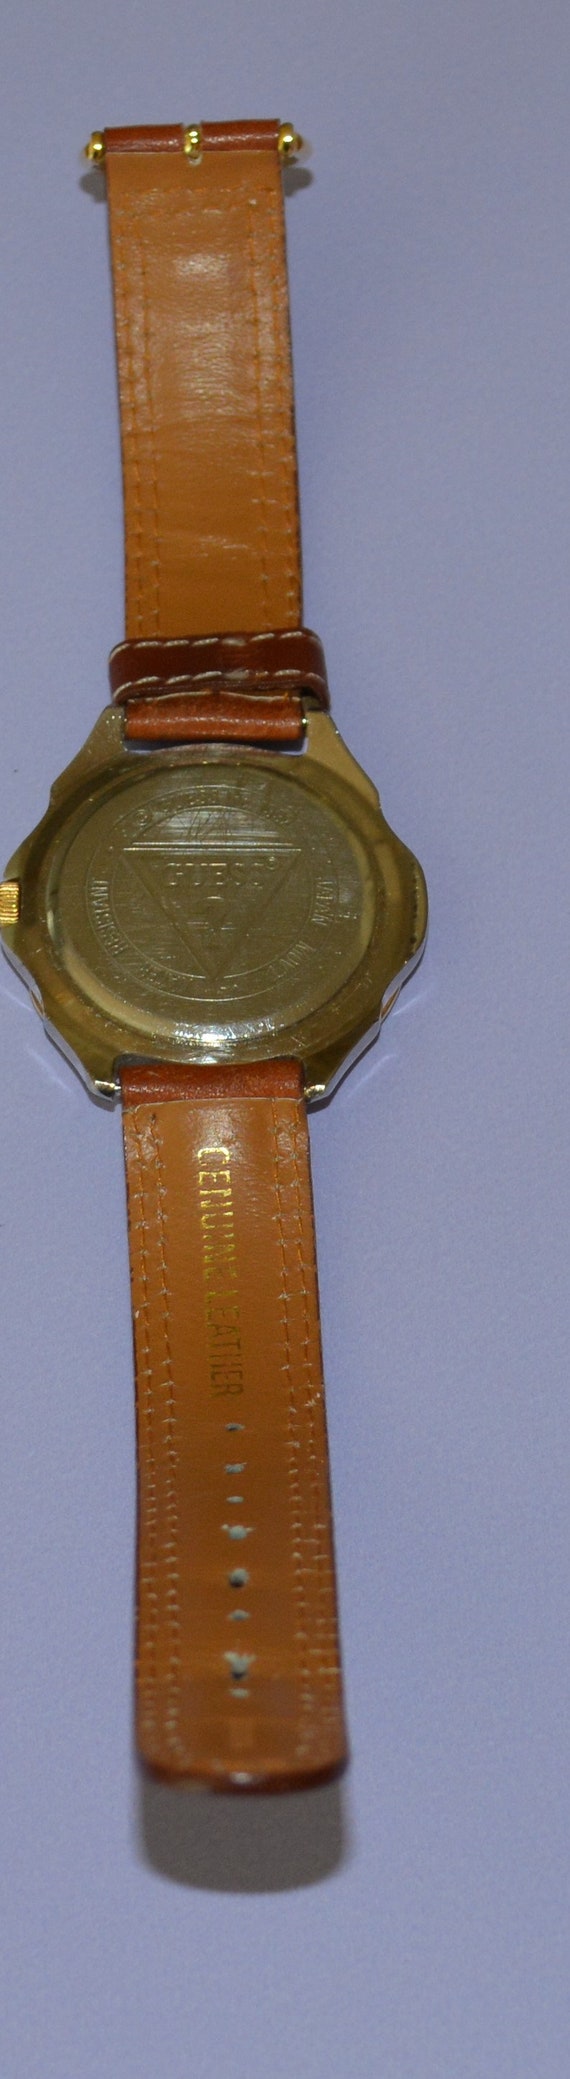 Watch-Guess Men's Watch 1992 Leather Strap Water … - image 3